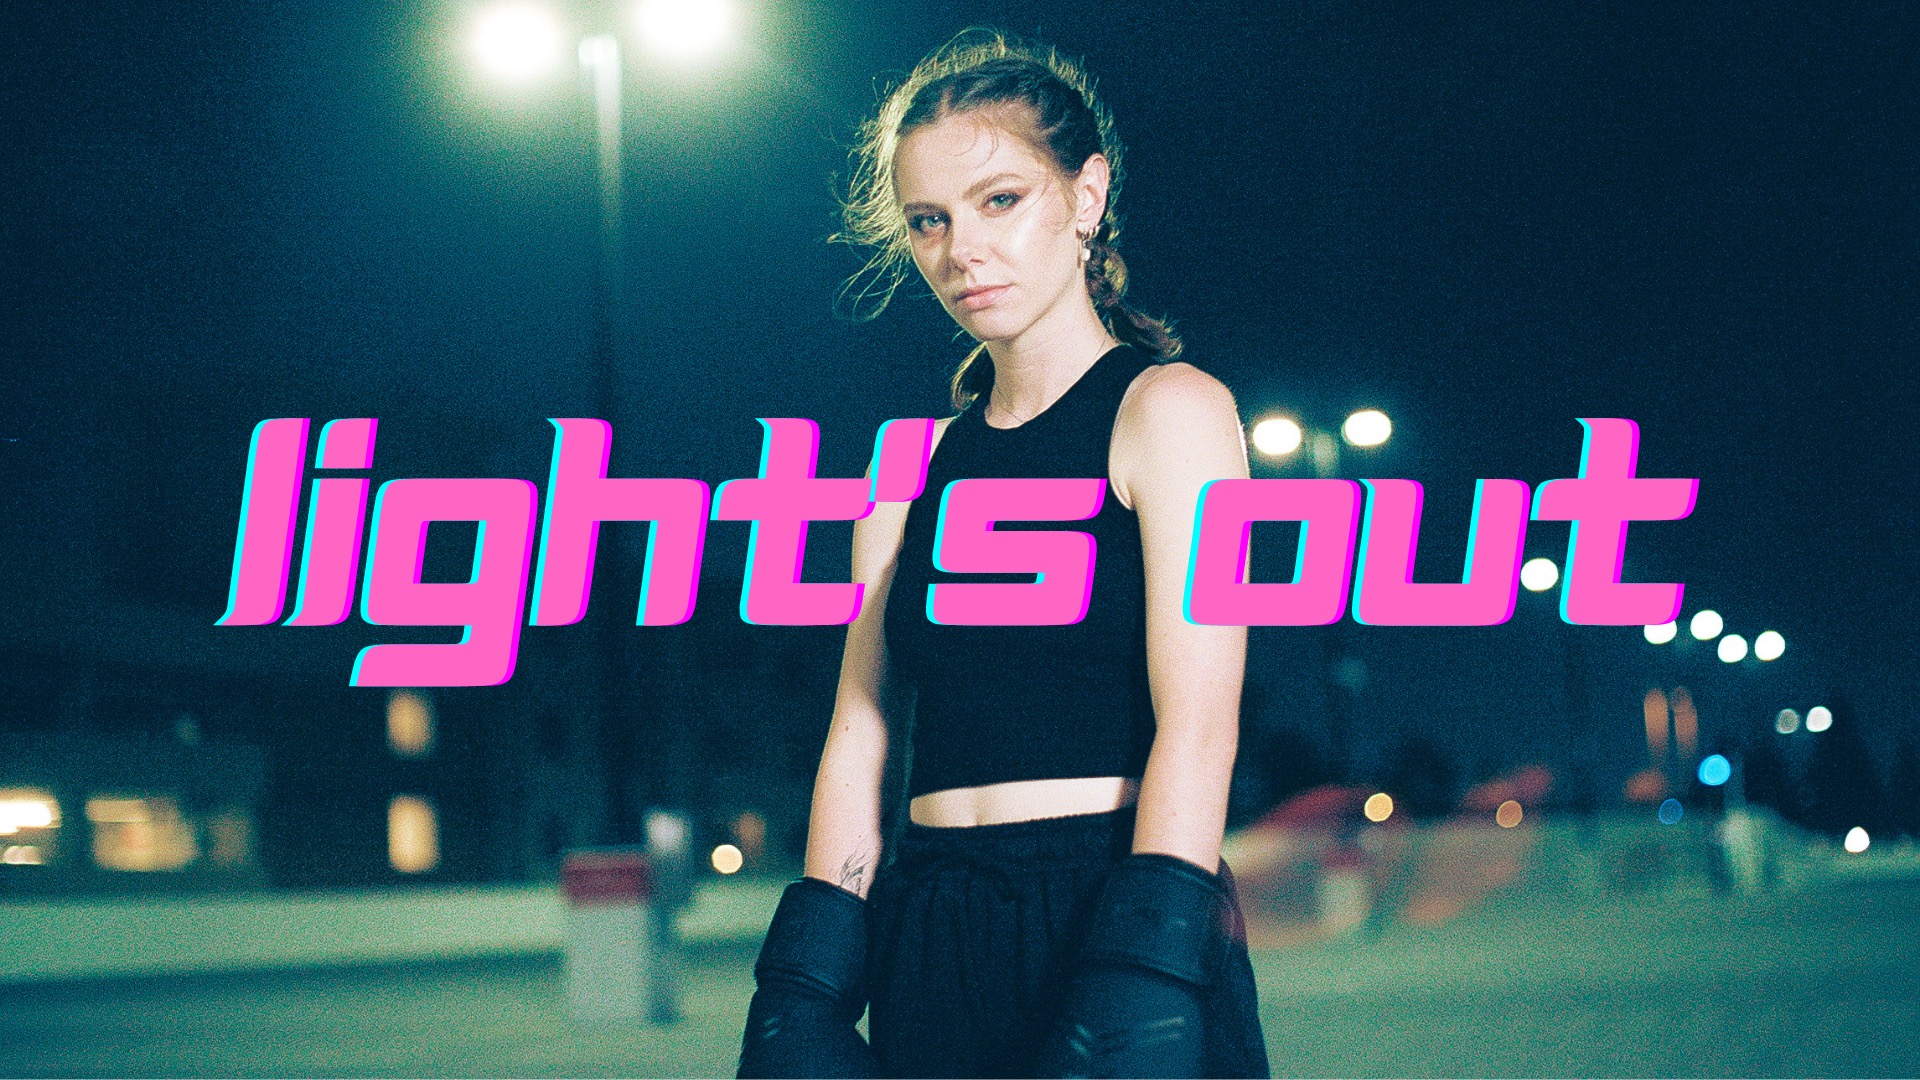 Madeleine Mayi Debuts Bad Ass Anthem "Lights Out"